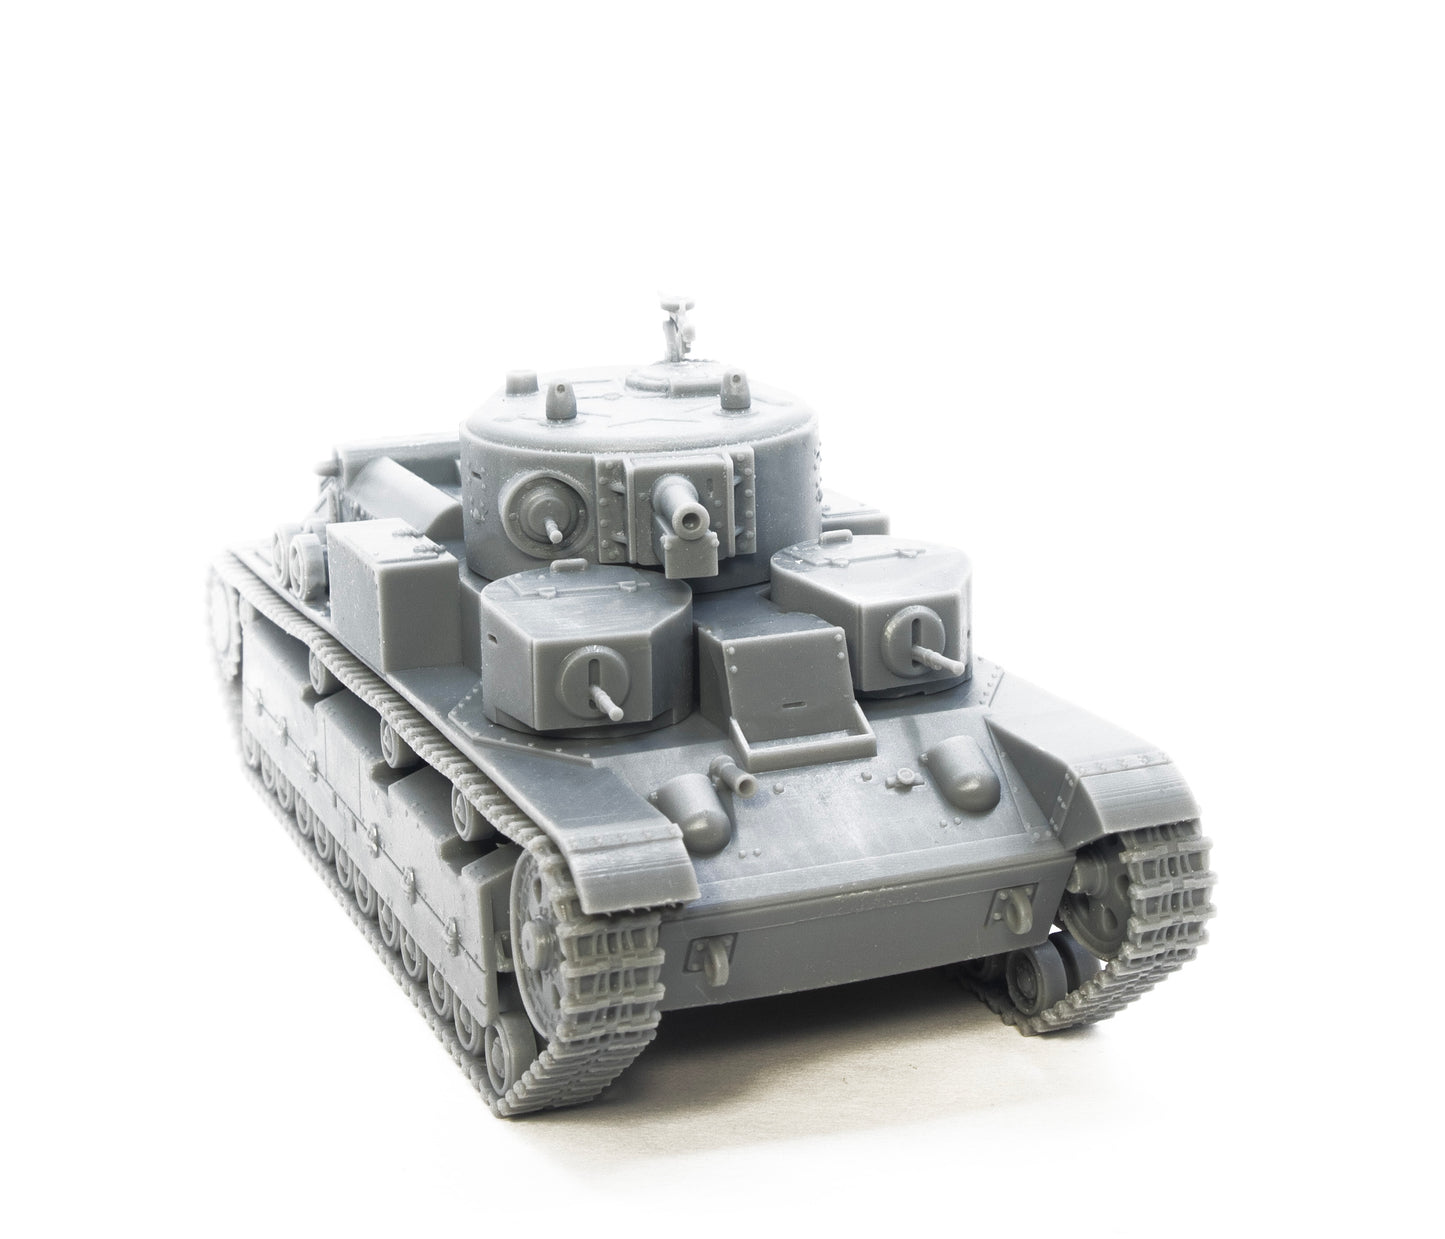 Finnish Up-Armored T-28 by Night Sky Miniatures.